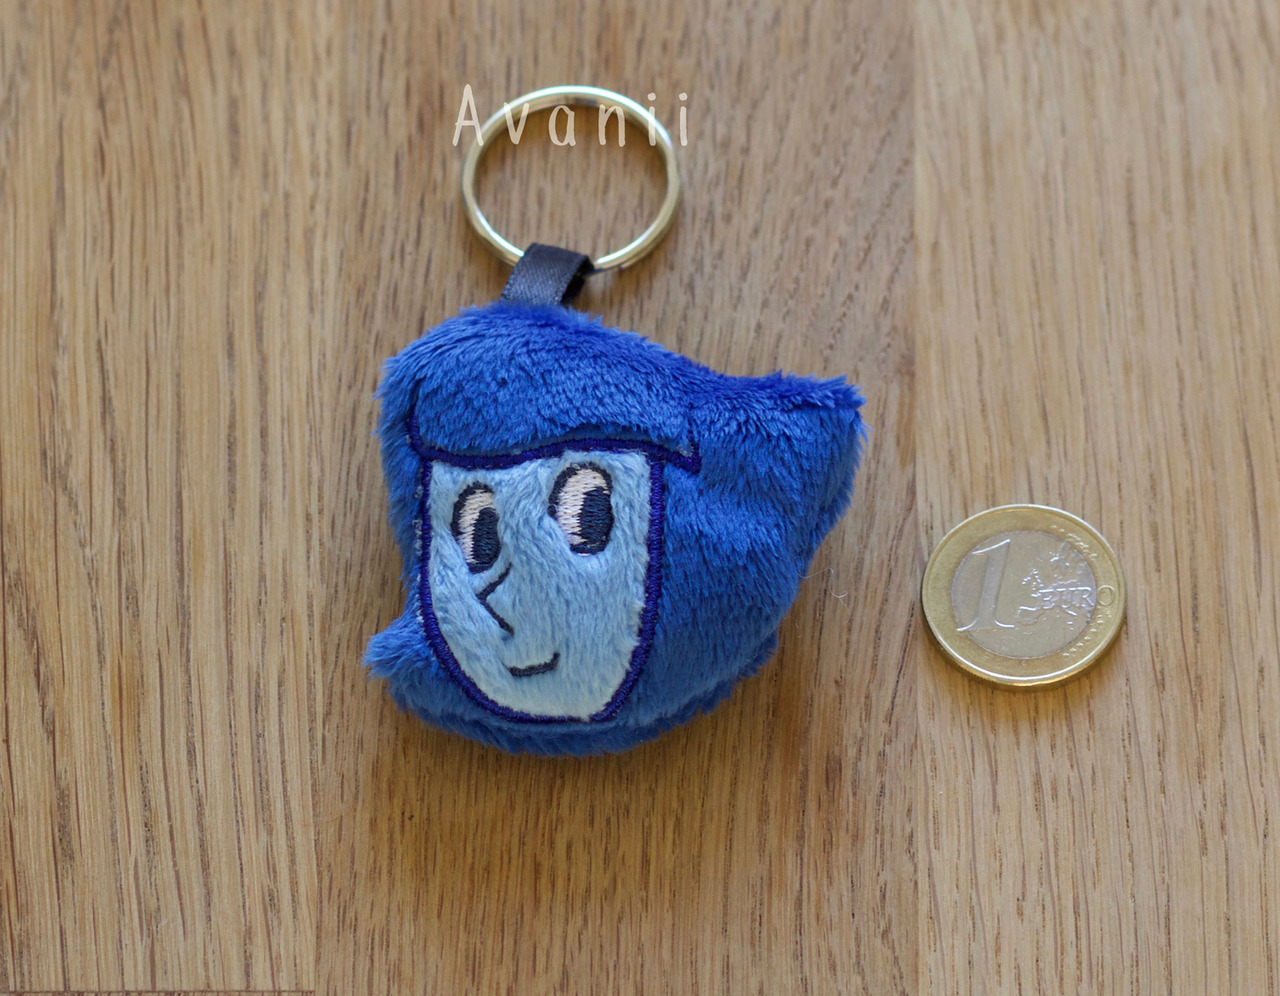 Steven Universe-themed soft charms are now available in my Etsy shop! :D https://www.etsy.com/shop/AvaniiPlush?section_id=22831680 Each charm is made of soft minky and features machine embroidered...